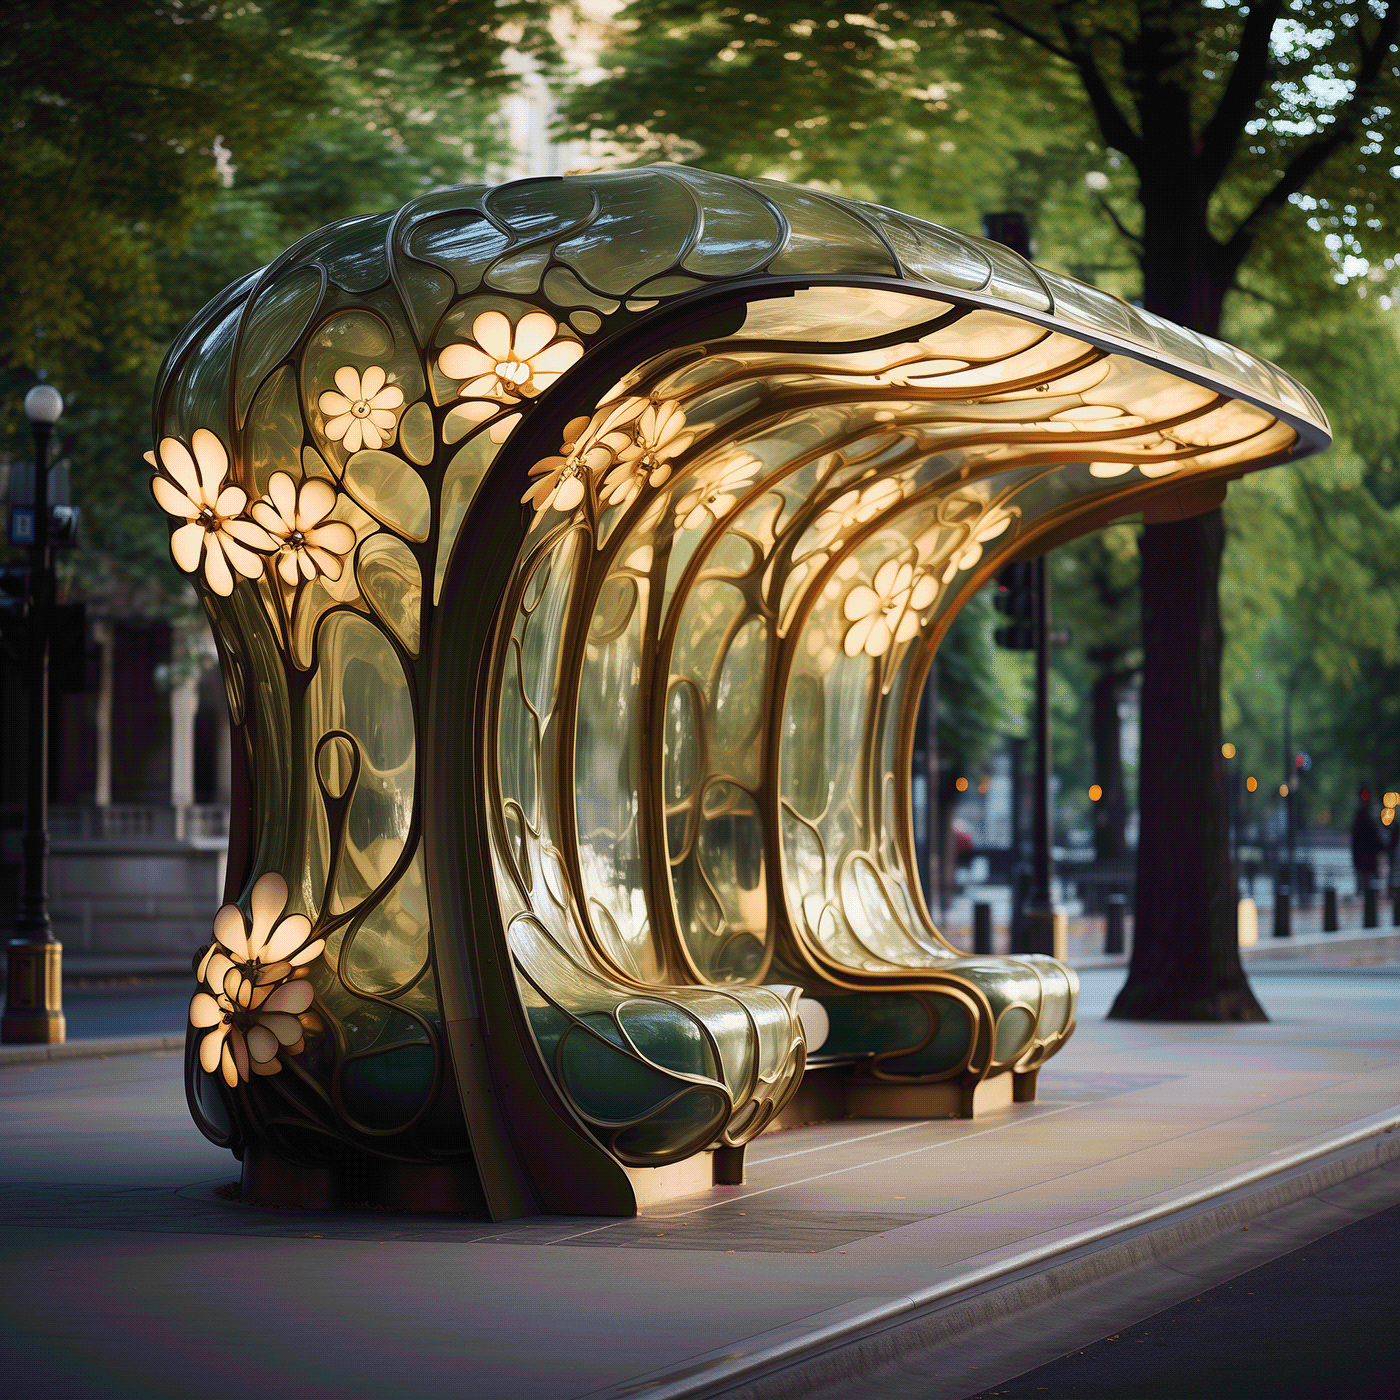 An artfully composed image showcasing a streamlined bus stop, blending Art Nouveau's elegant forms w